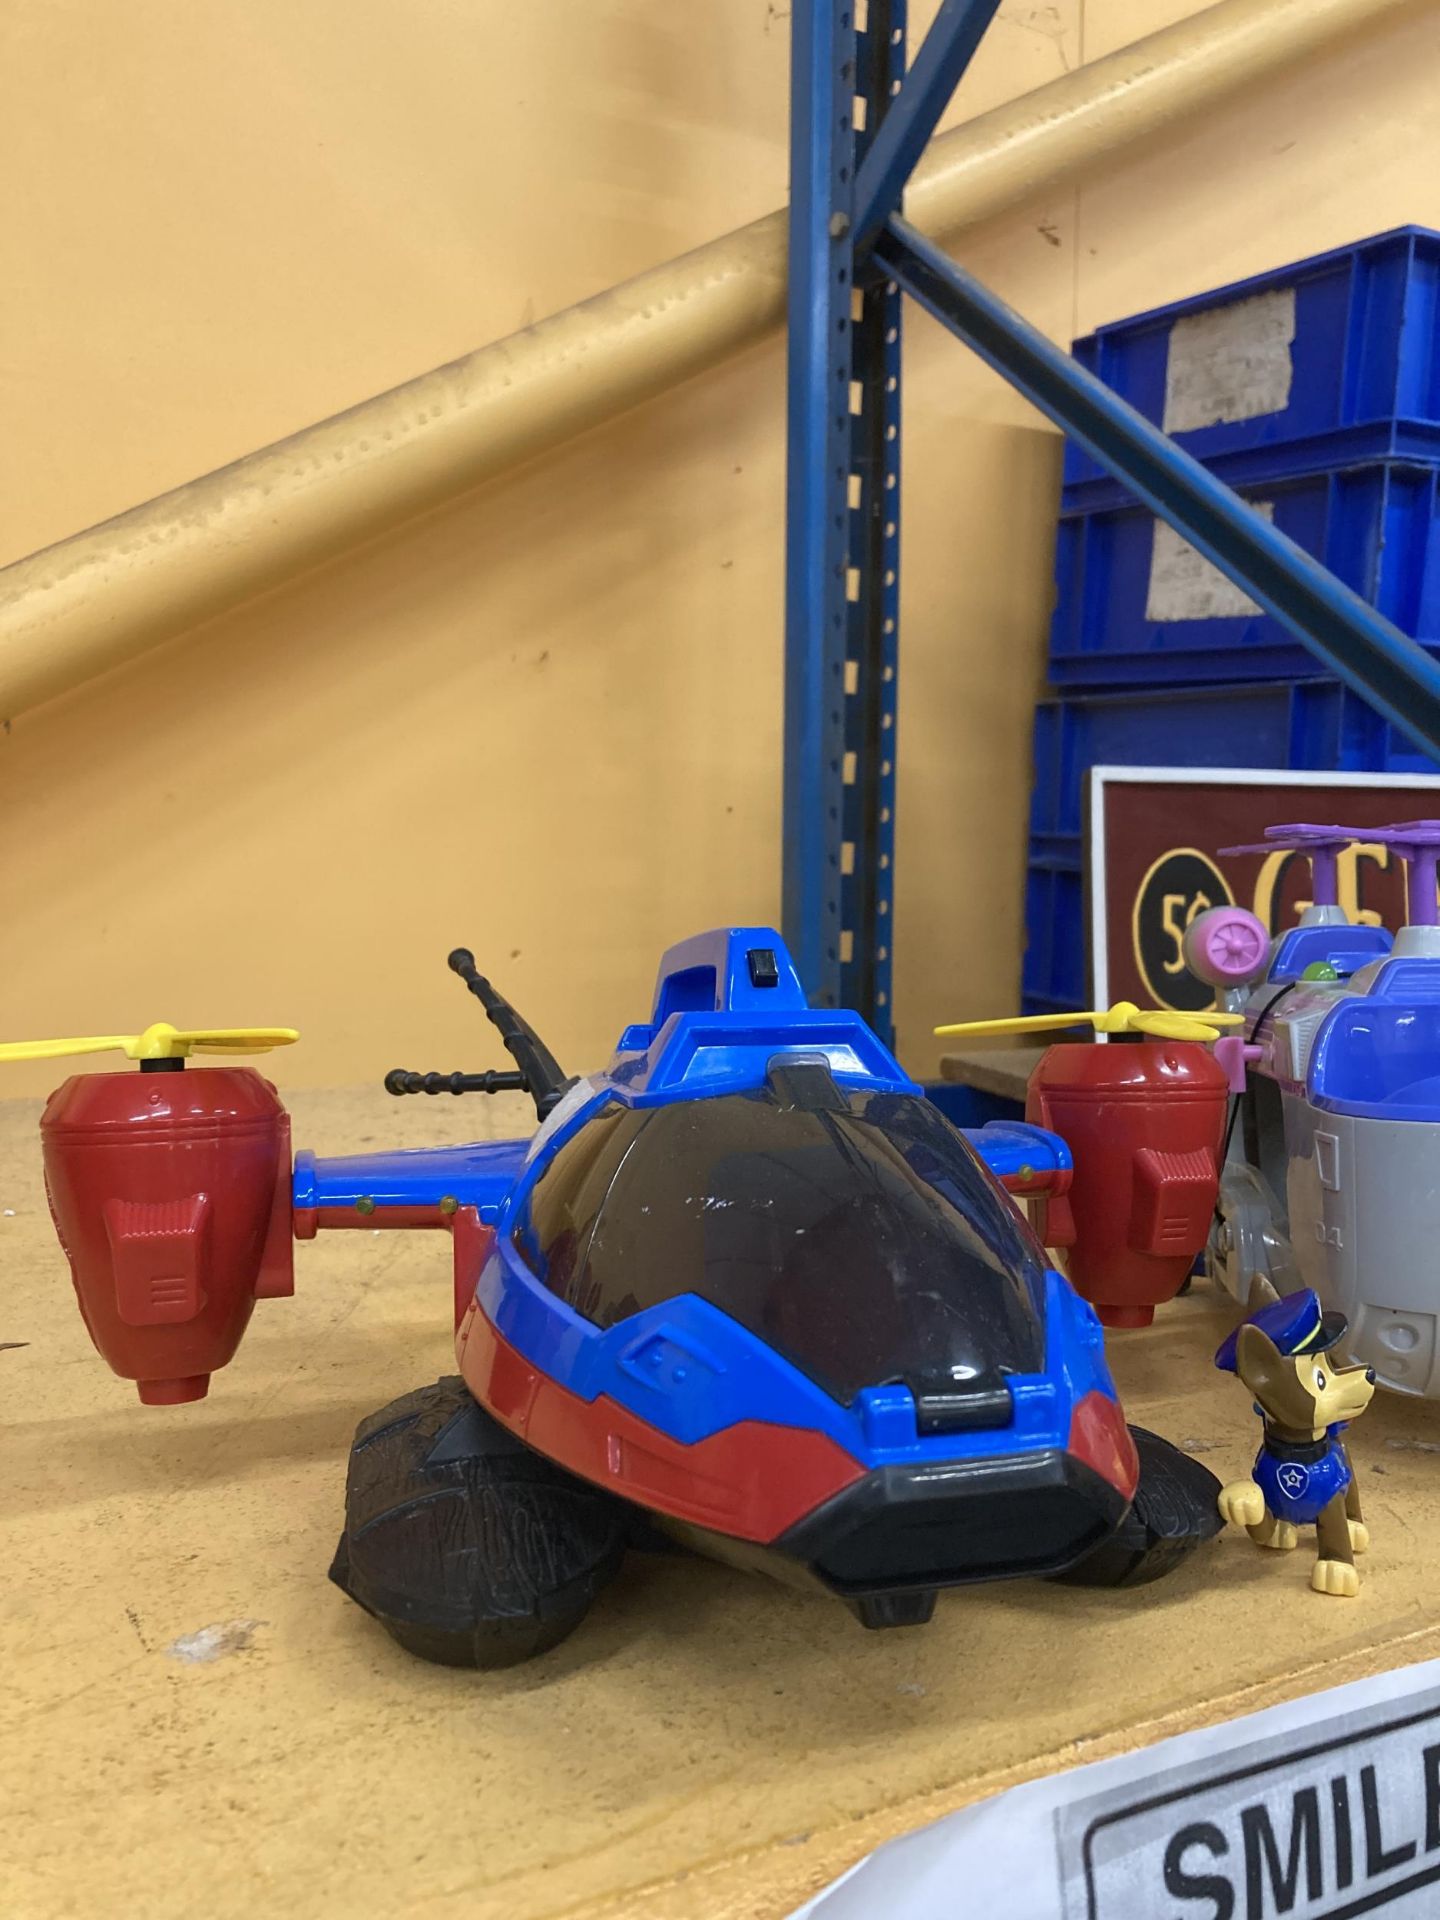 TWO PAW PATROL AIRCRAFT PLUS CHARACTERS, CHASE AND SKY - Image 3 of 3